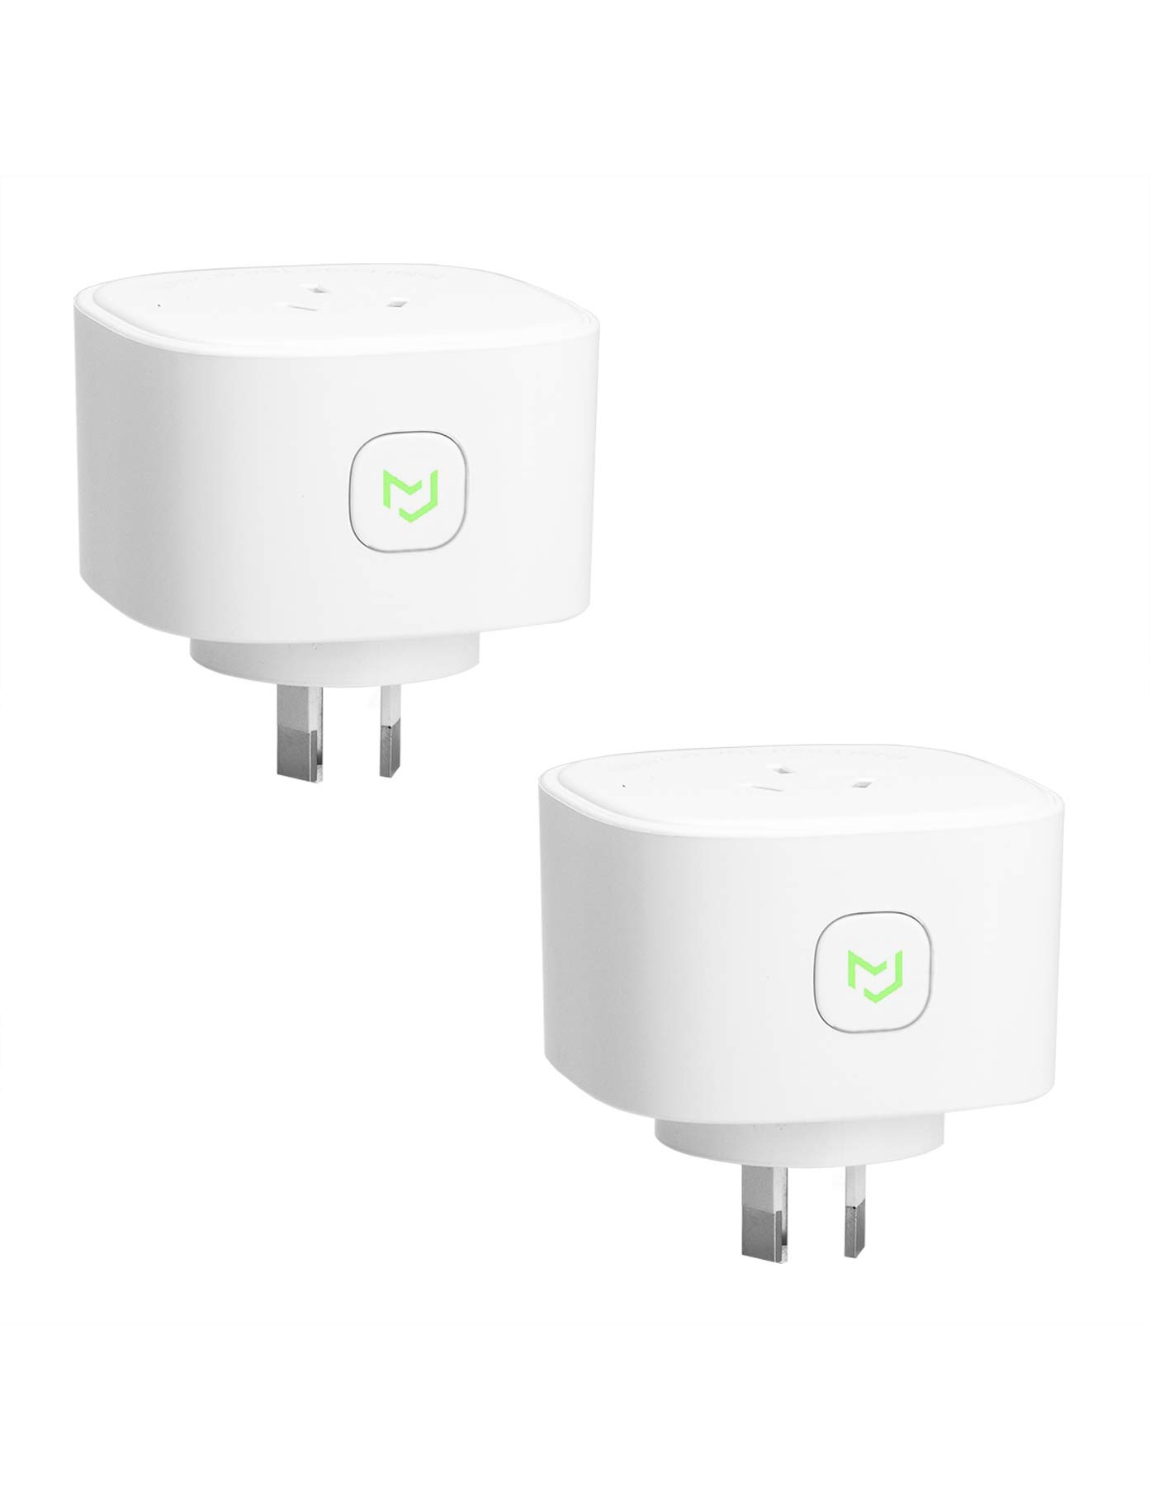 Meross Outdoor Smart Plug, Wi-Fi Outlet with 2 Grounded Outlets – Meross  Official Store